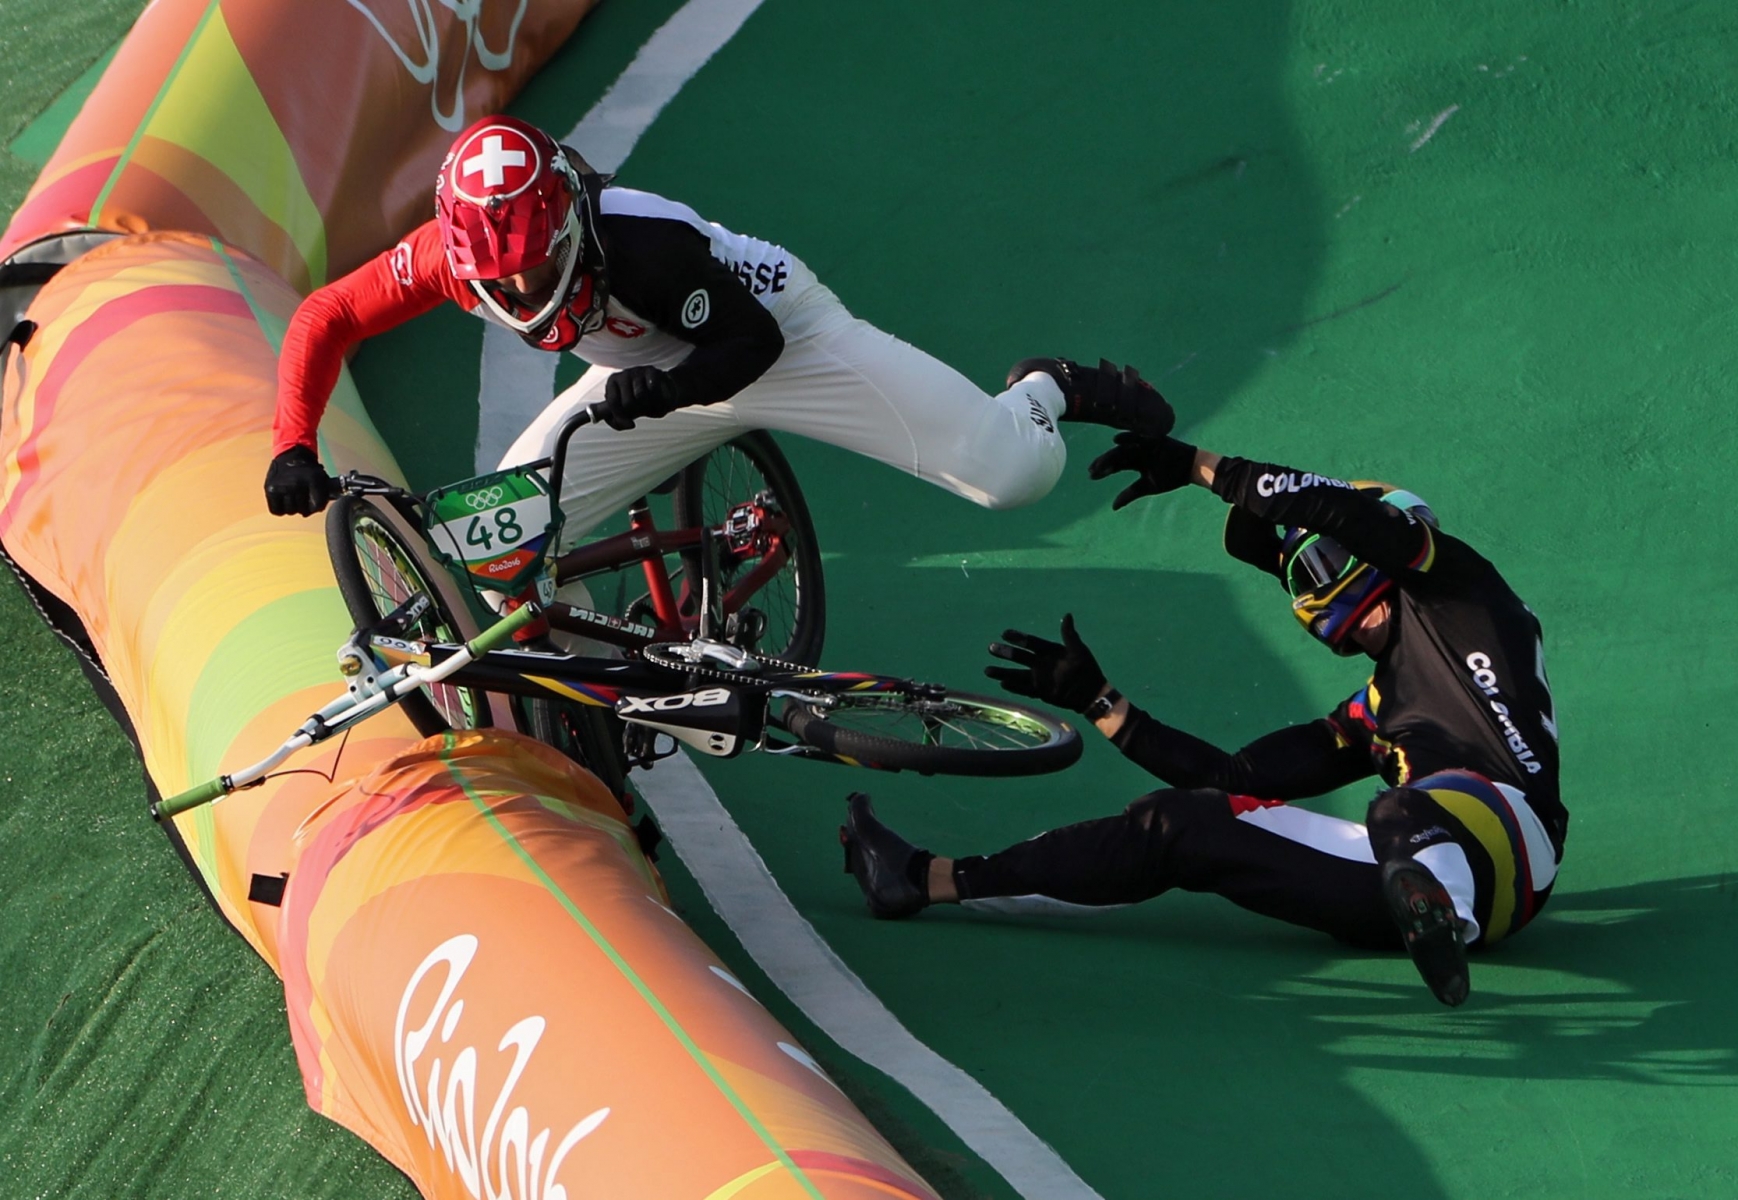 epa05499597 David Graf of Switzerland (L) and Carlos Mario Oquendo Zabala of Colombia (R) crash during a men's BMX Cycling Semi final competition of the Rio 2016 Olympic Games at the Olympic BMX Centre in Rio de Janeiro, Brazil, 19 August 2016.  EPA/FAZRY ISMAIL BRAZIL RIO 2016 OLYMPIC GAMES